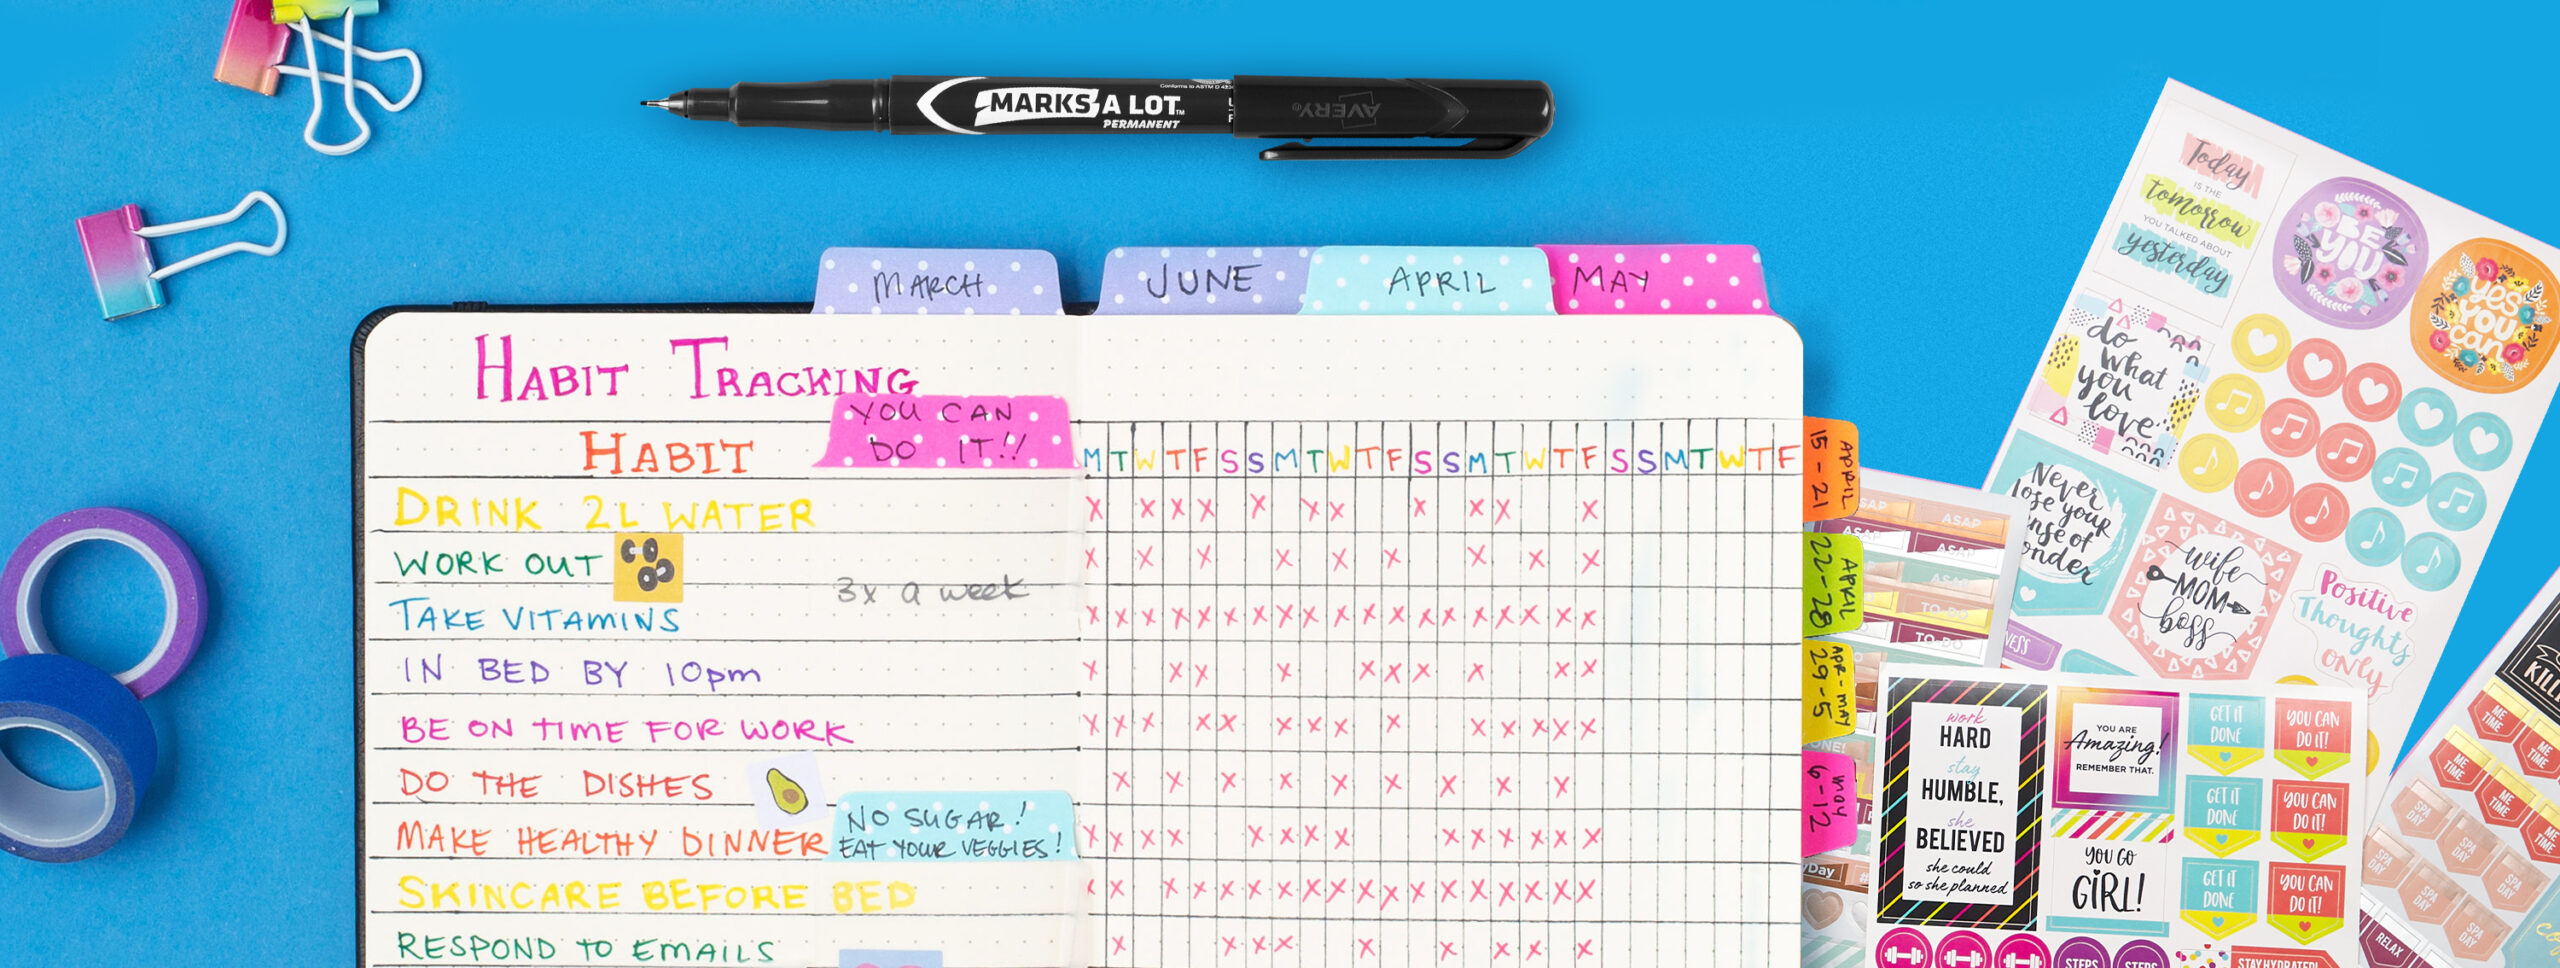 The Best Pens and Highlighters On  - Planners, Productivity & Home  Organization